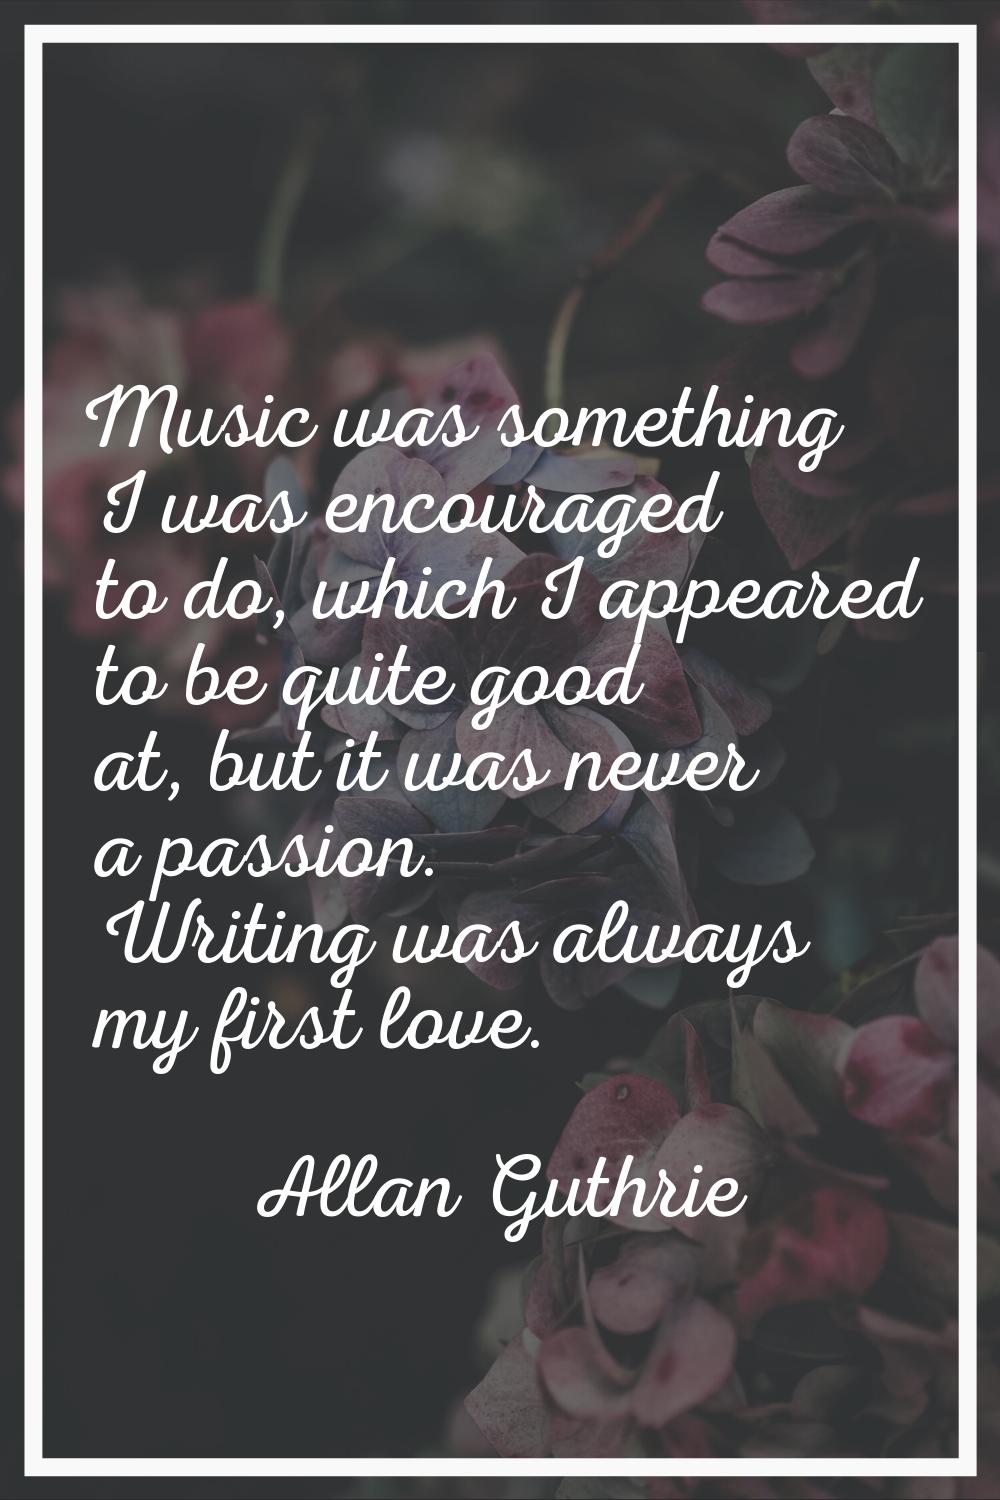 Music was something I was encouraged to do, which I appeared to be quite good at, but it was never 